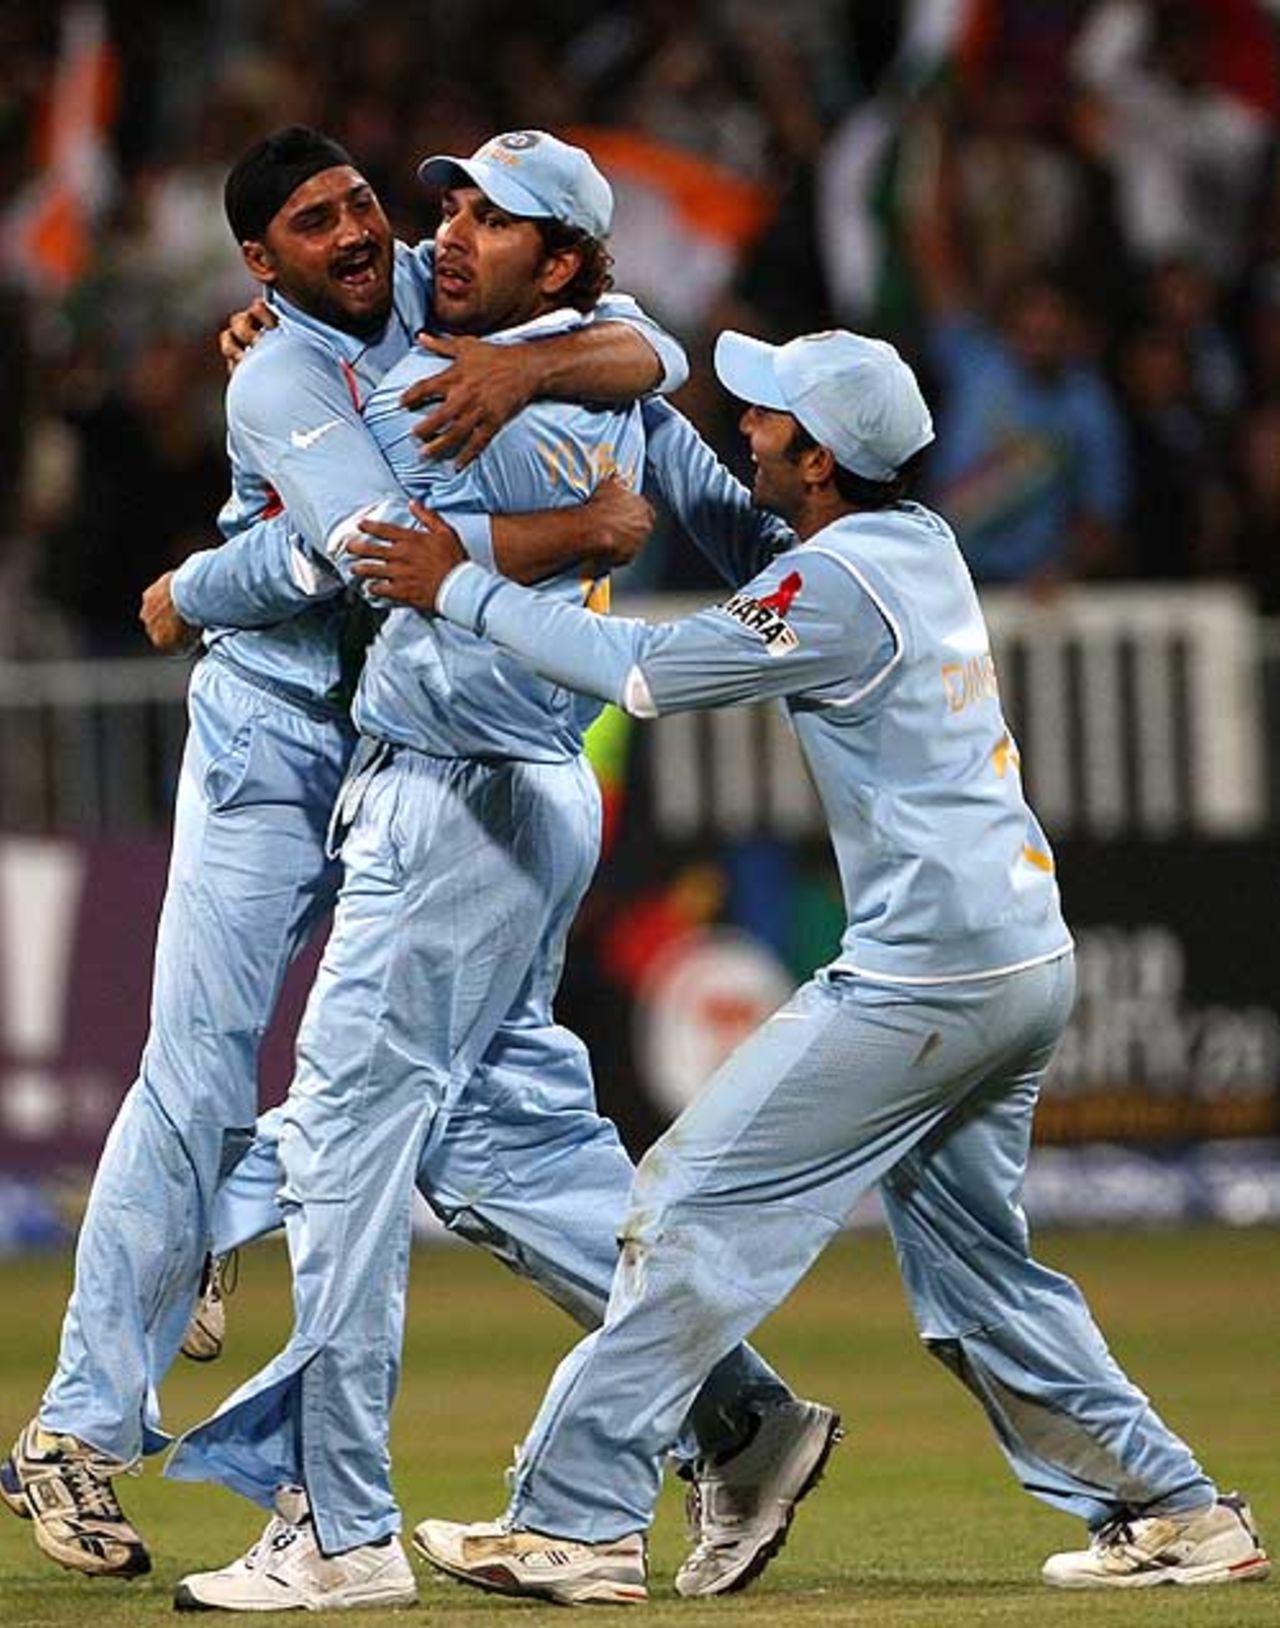 The Indian players are delighted after a run-out ensures the match is tied, India v Pakistan, Group D, ICC World Twenty20, Durban, September 14, 2007 